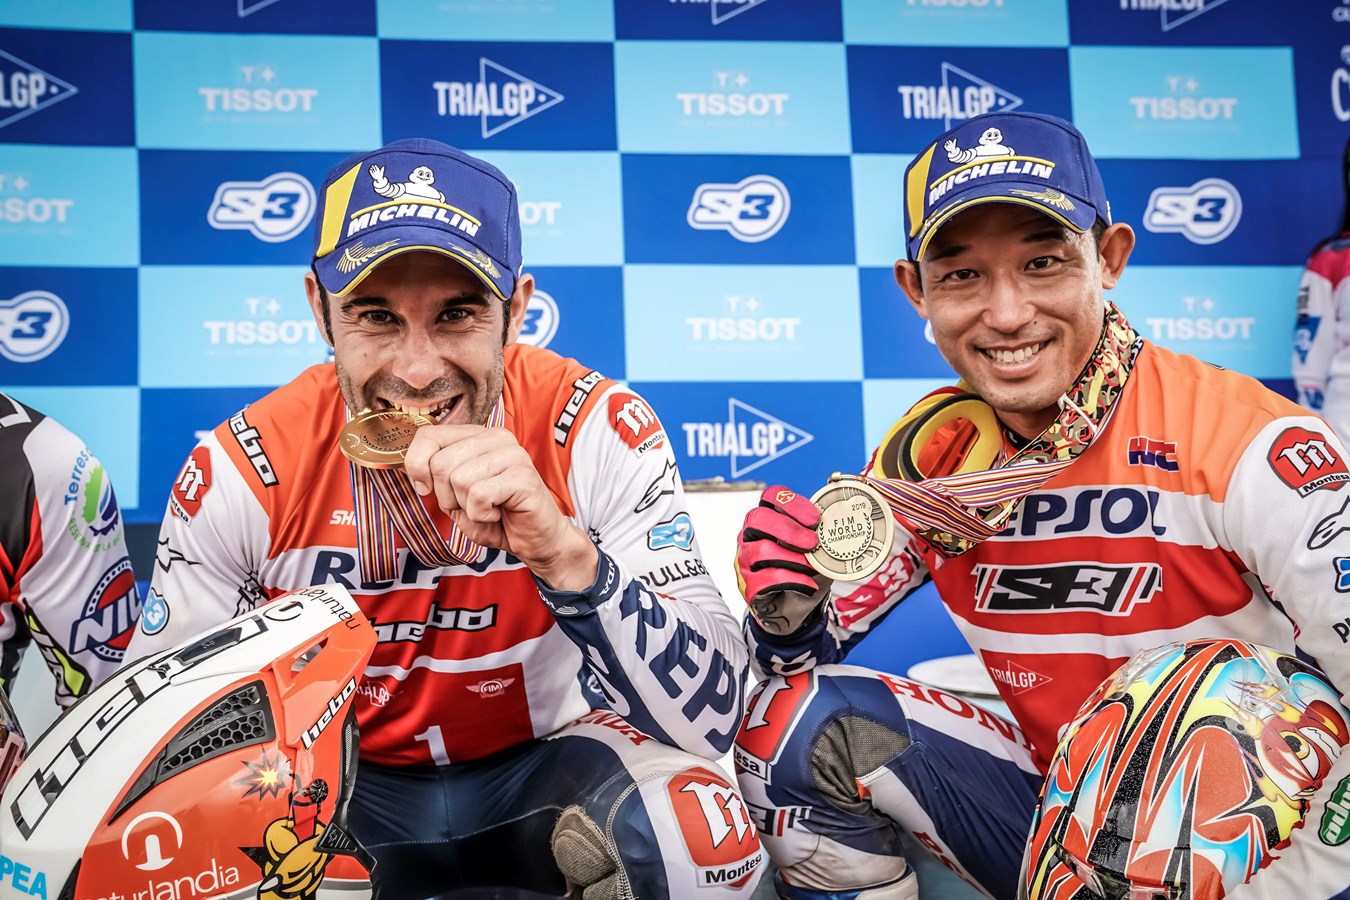 Toni Bou finishes the world championship with a full season of victories. Fujinami achieves third overall